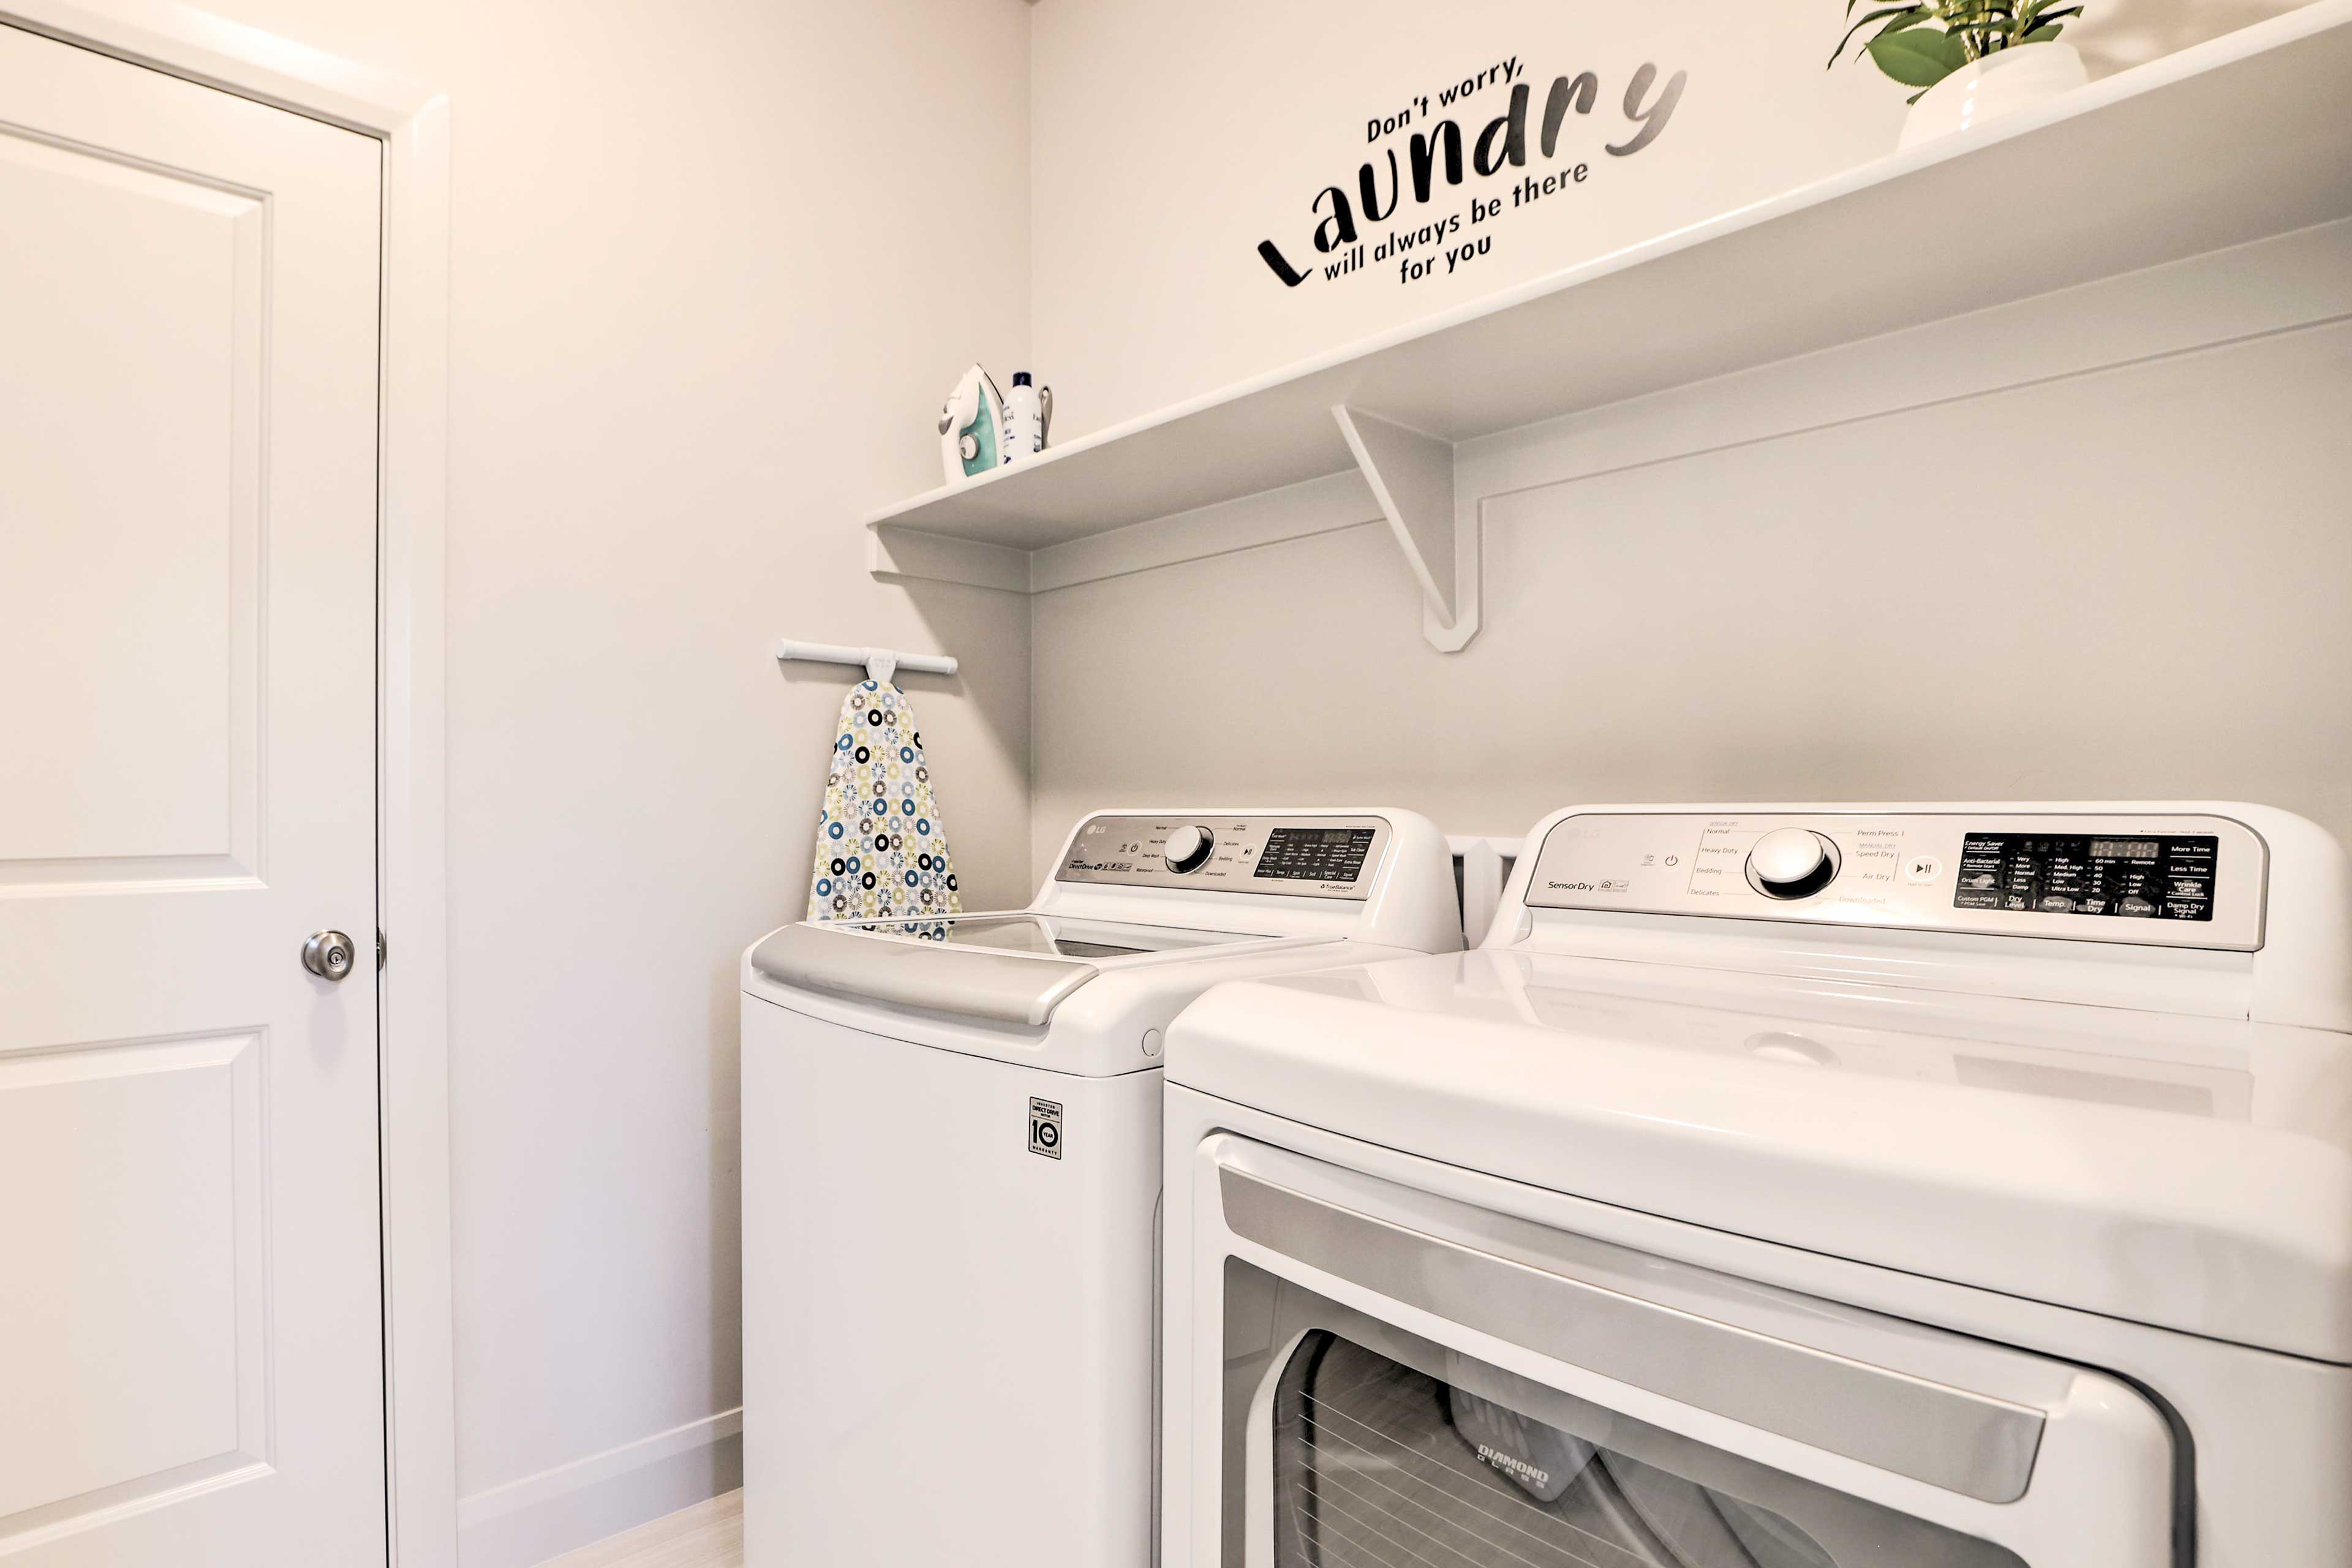 Laundry Area | Iron & Board | Laundry Detergent Provided